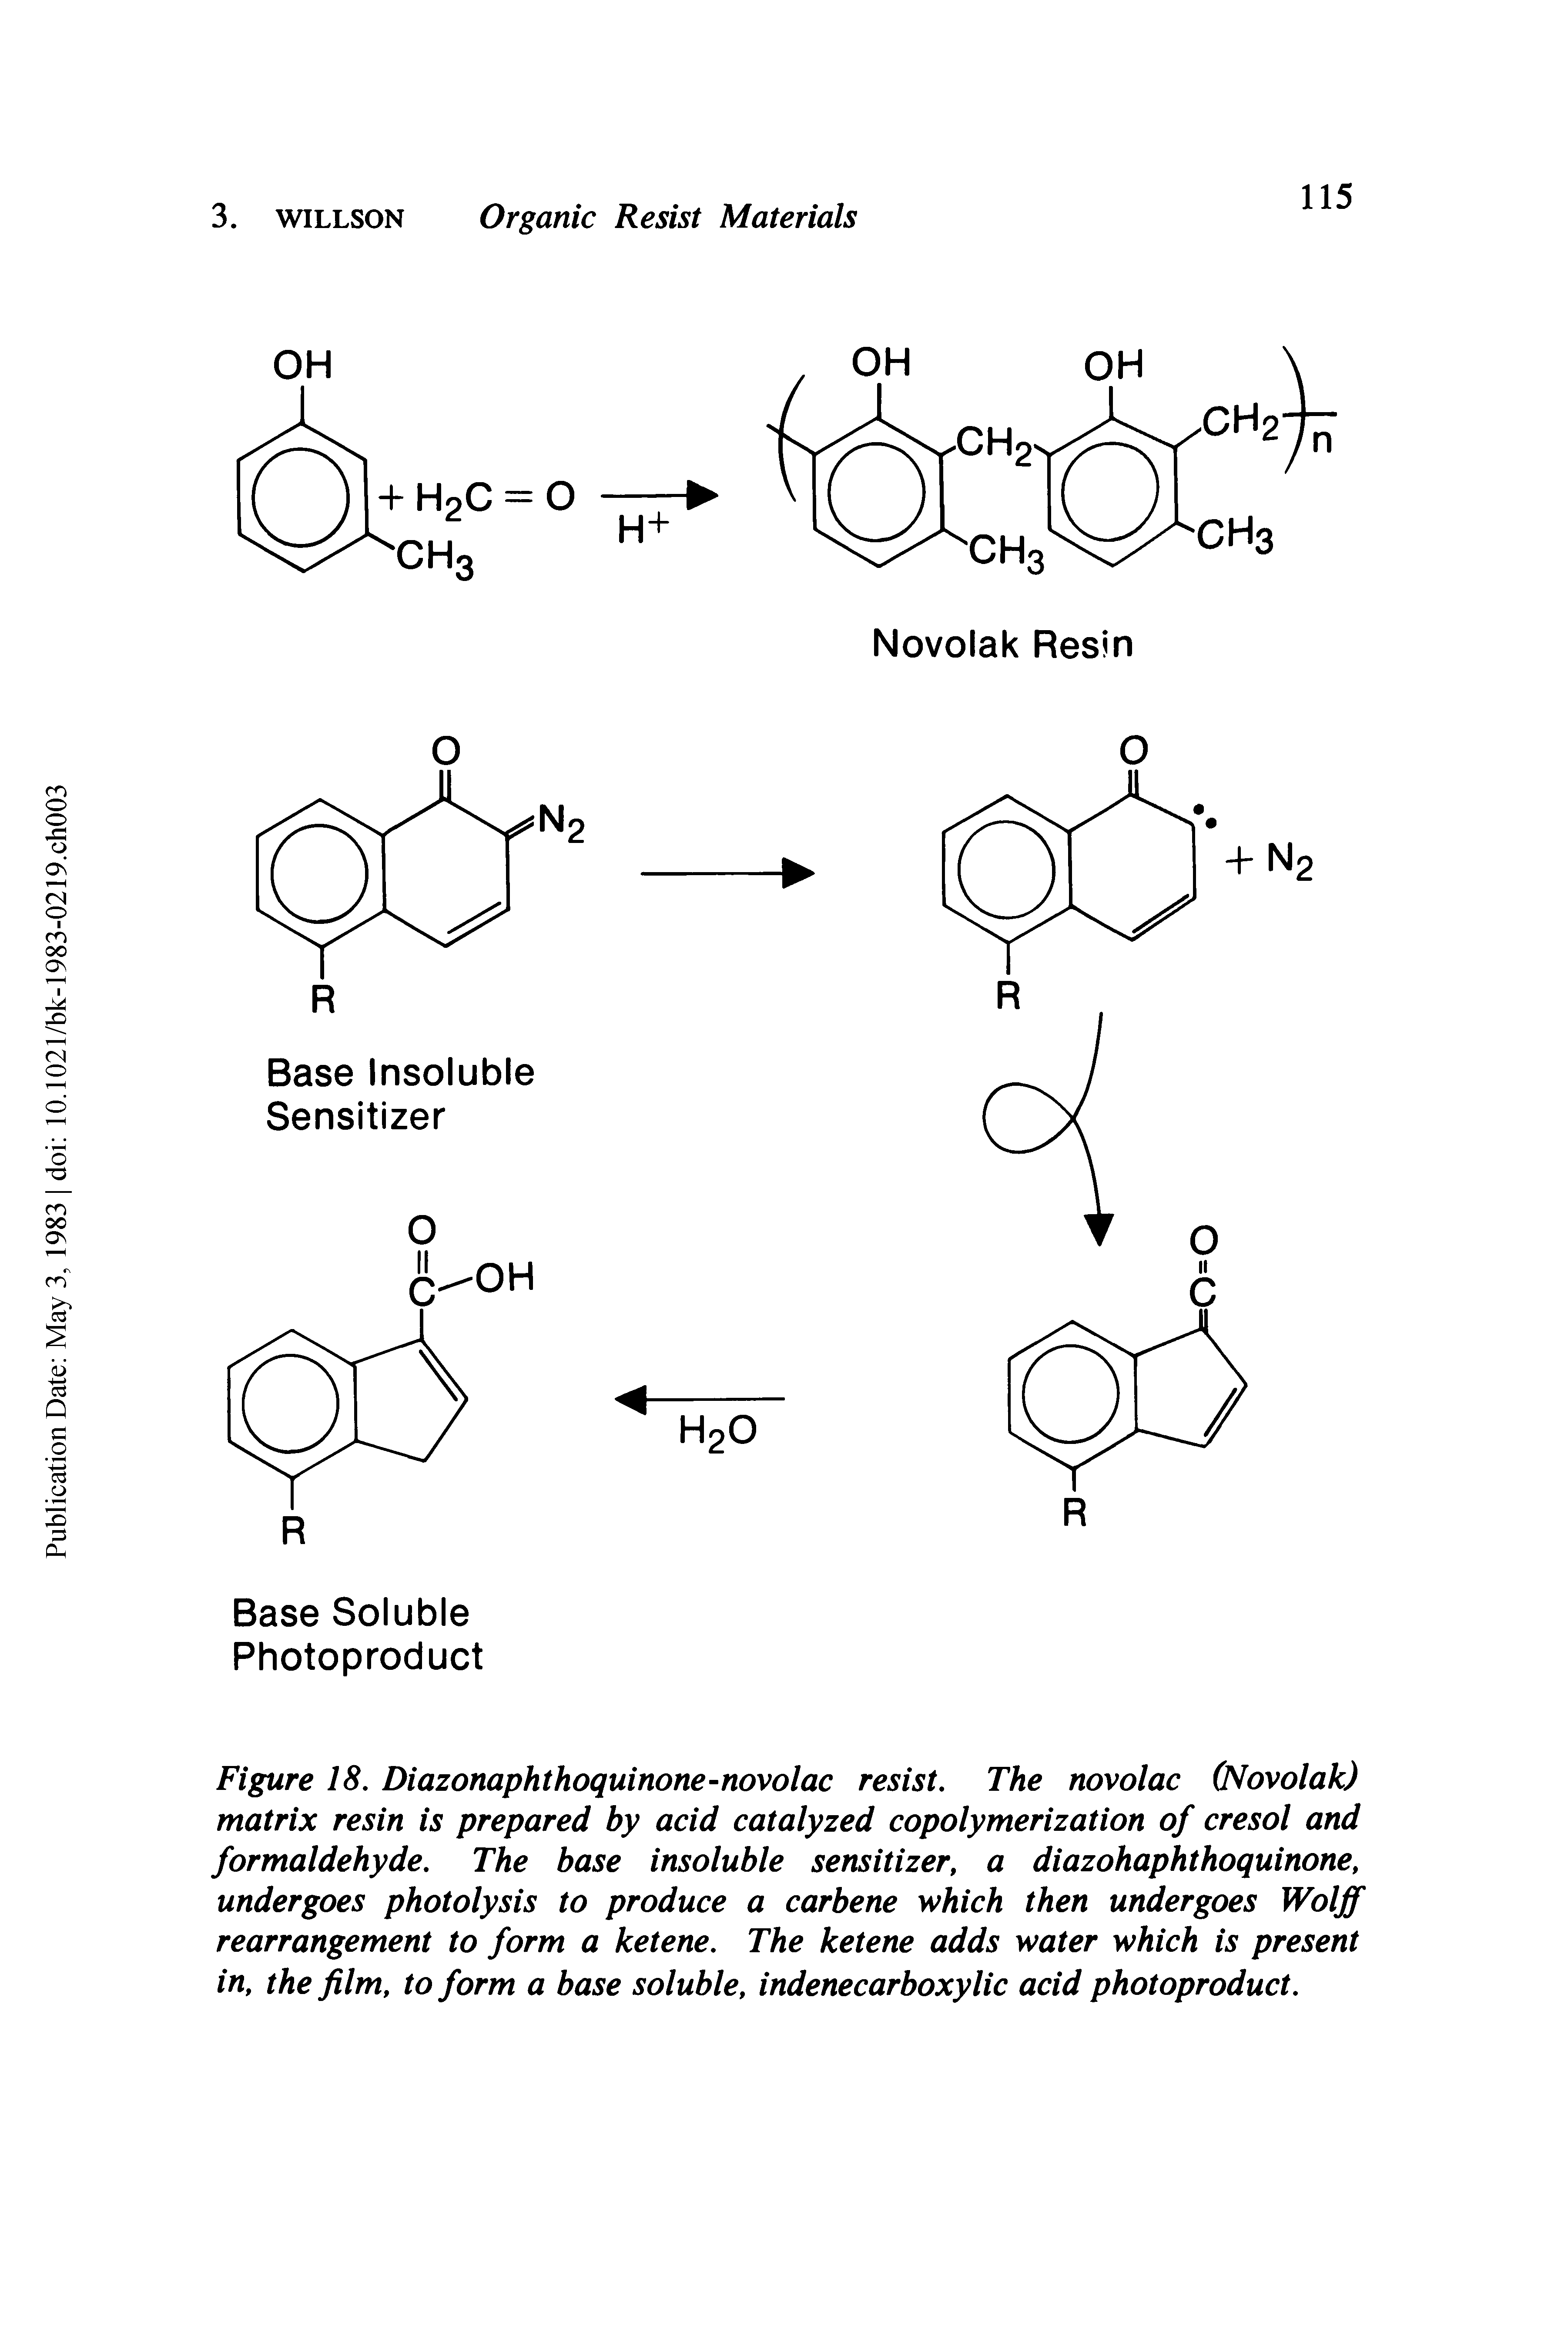 Figure 18. Diazonaphthoquinone-novolac resist. The novolac (Novolak) matrix resin is prepared by acid catalyzed copolymerization of cresol and formaldehyde. The base insoluble sensitizer, a diazohaphthoquinone, undergoes photolysis to produce a carbene which then undergoes Wolff rearrangement to form a ketene. The ketene adds water which is present in, the film, to form a base soluble, indenecarboxylic acid photoproduct.